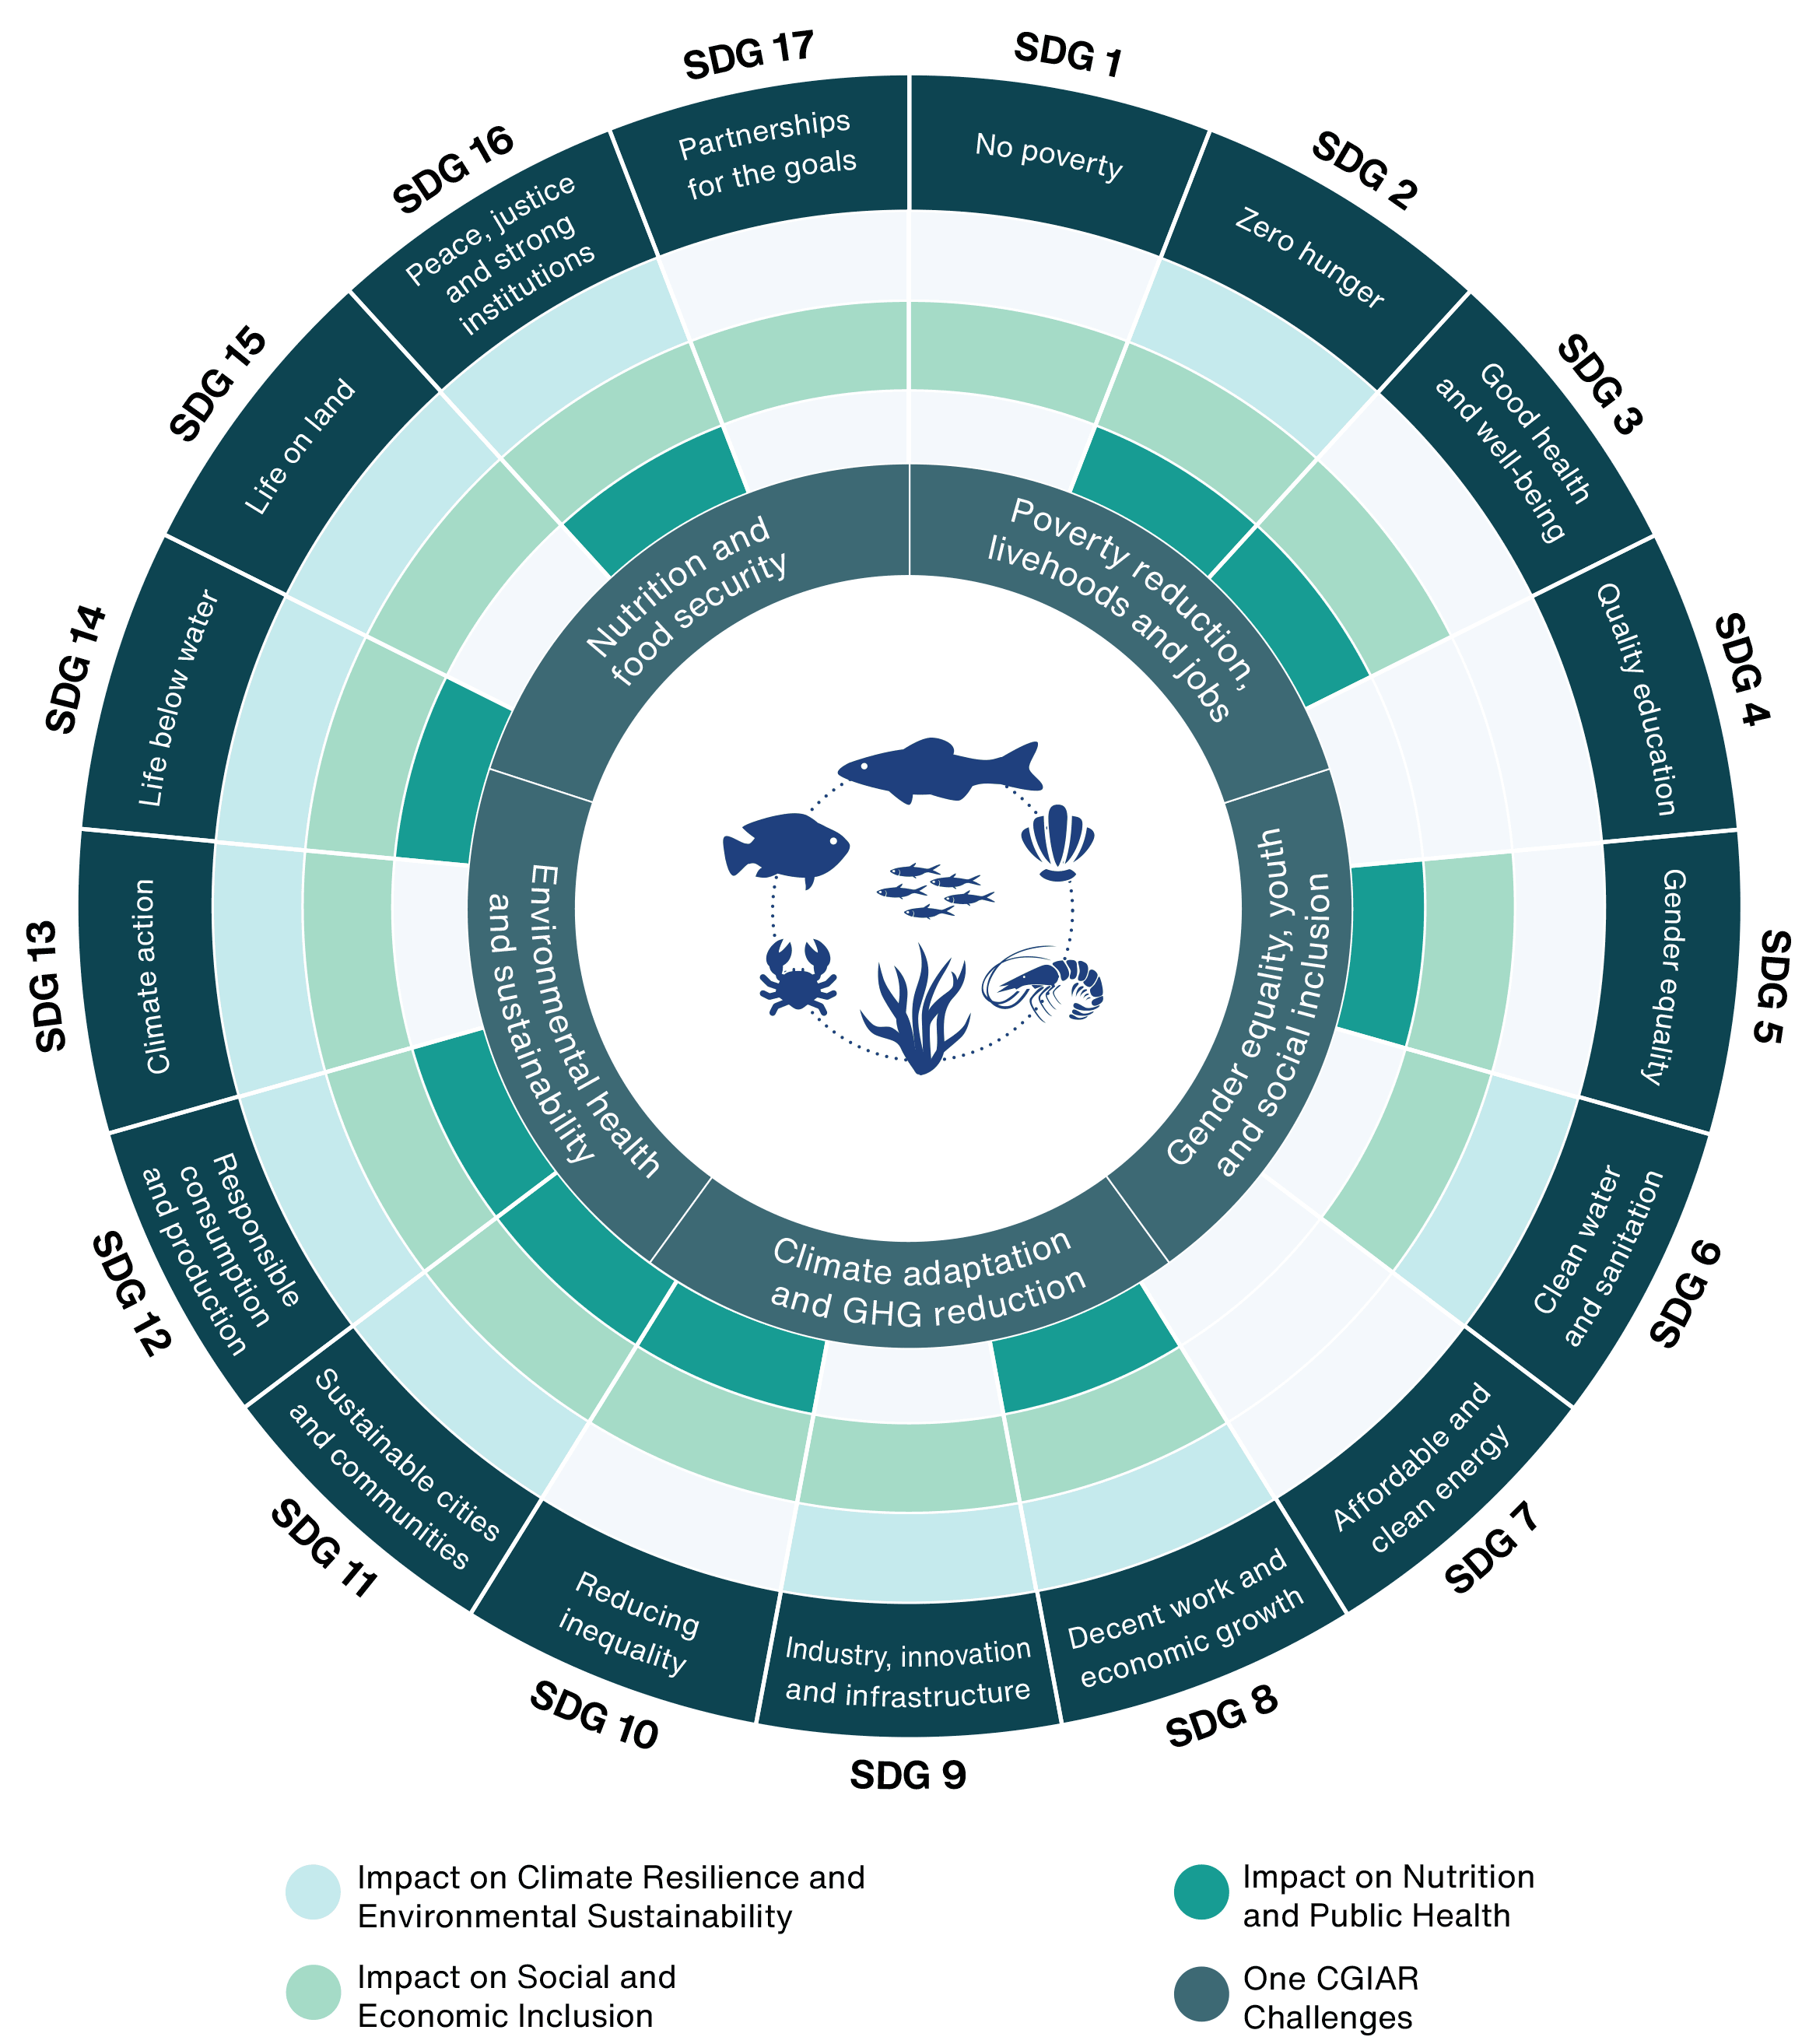 Figure 3. Contribution of aquatic foods to One CGIAR challenges and 2030 SDGs.